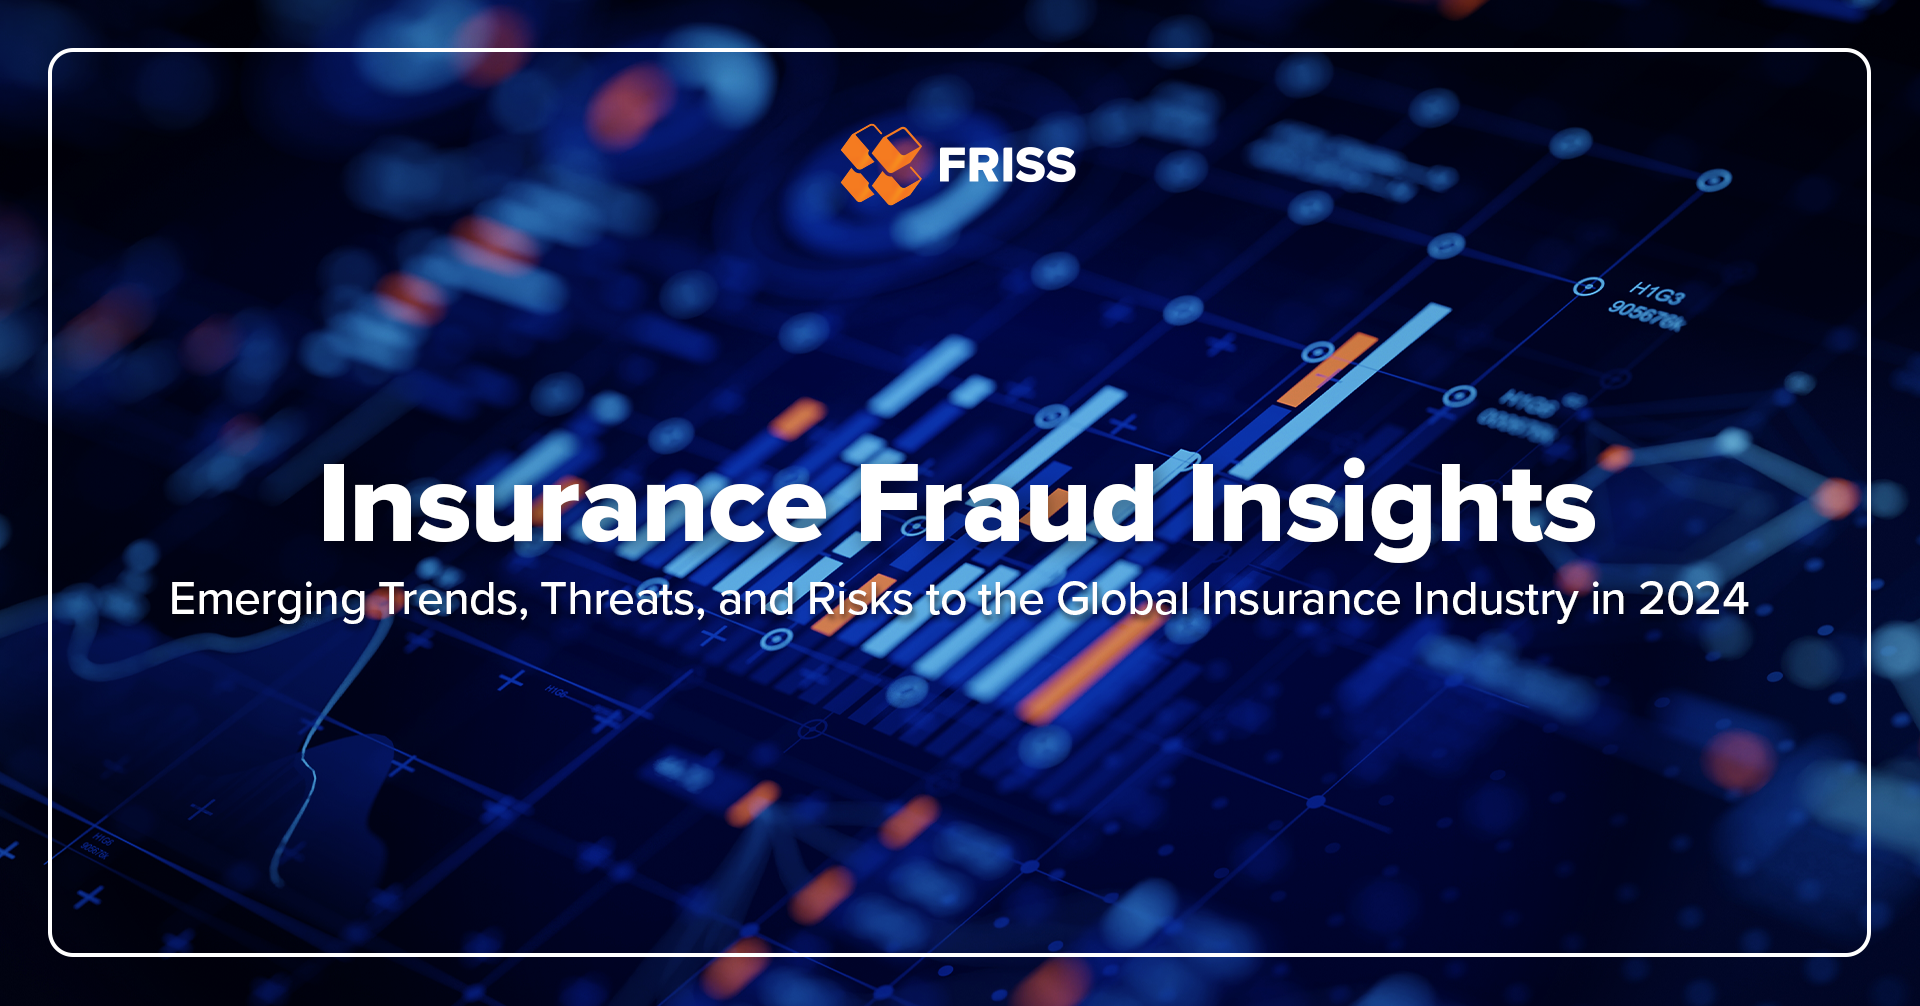 FRISS Releases Findings From Insurance Industry Survey About Fraud and Emerging Threats